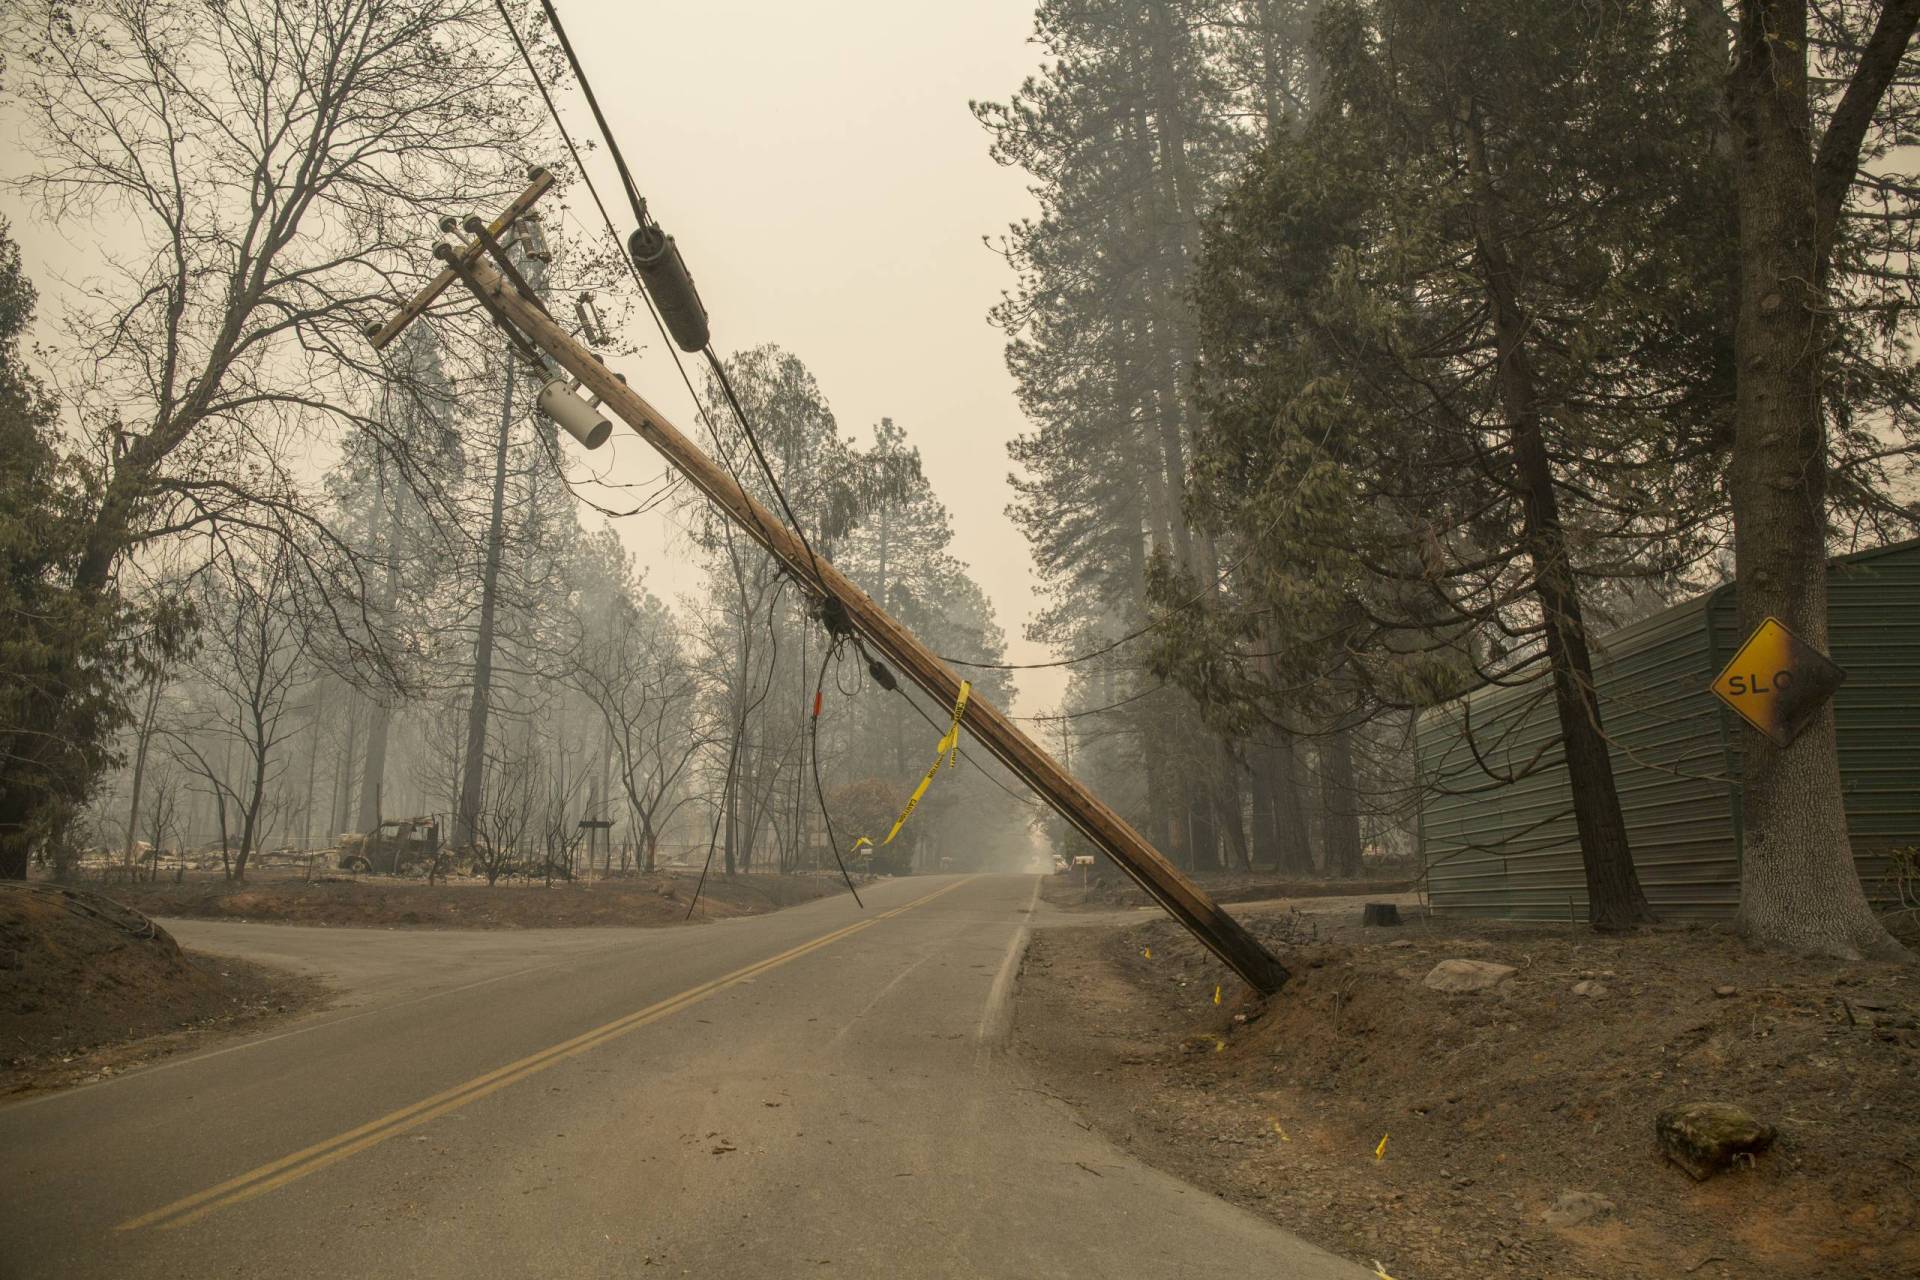 Telephone pole tipped over, pulling down wires, amid smoky air